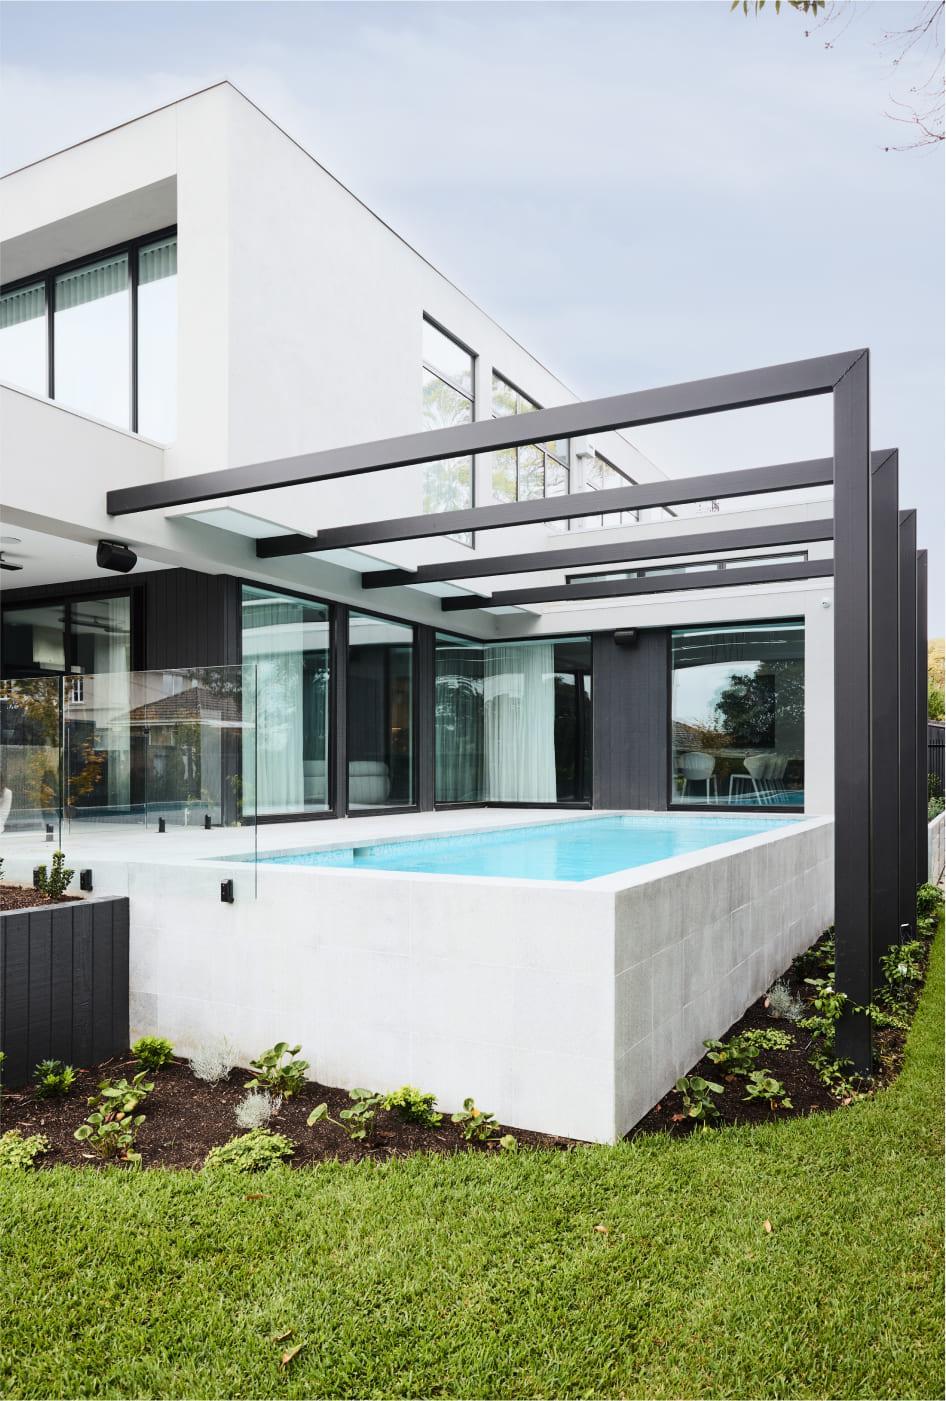 Exterior pool surrounded by verdant landscaping